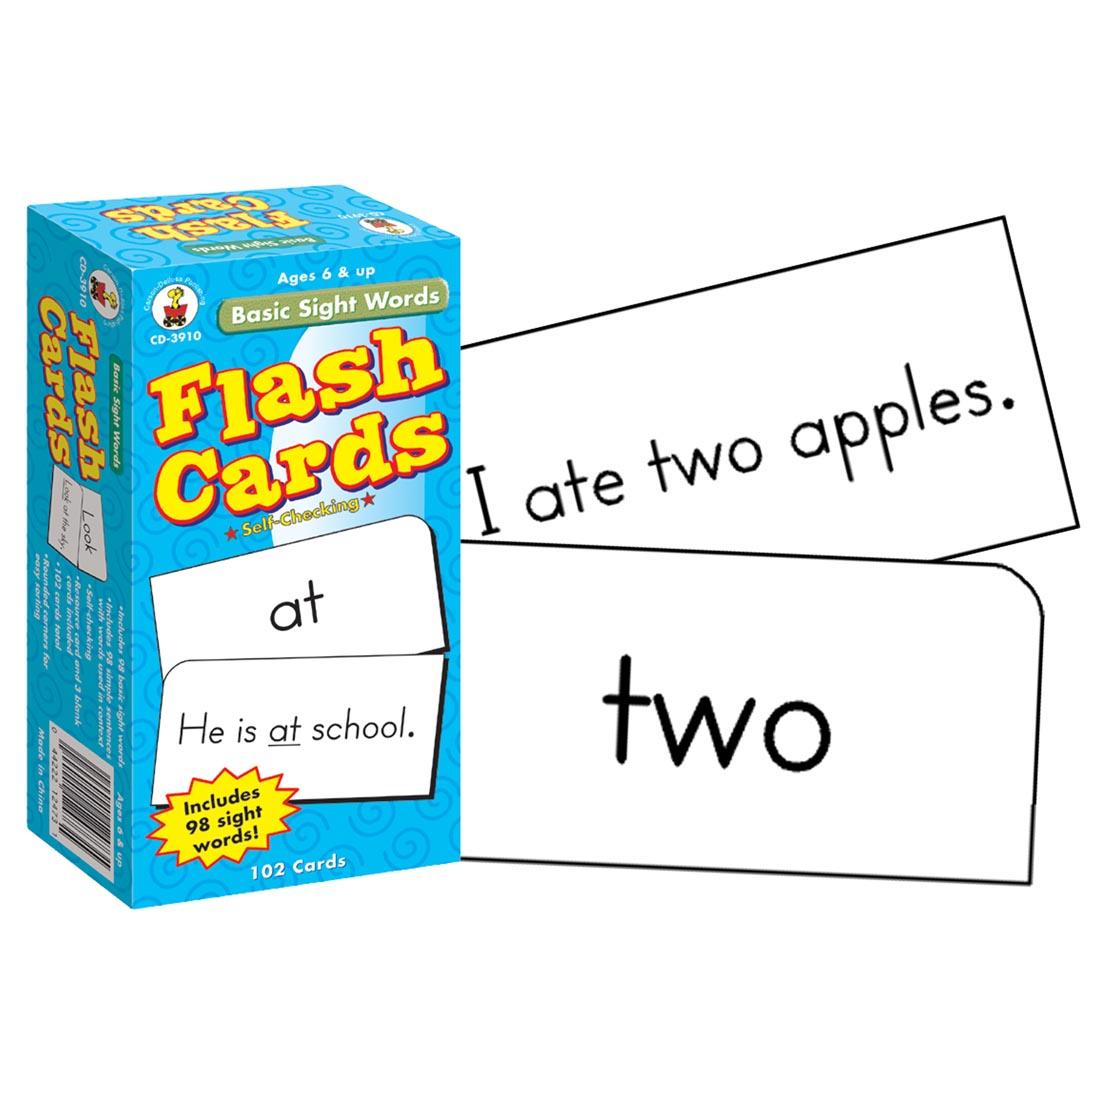 Basic Sight Words Flash Cards by Carson Dellosa